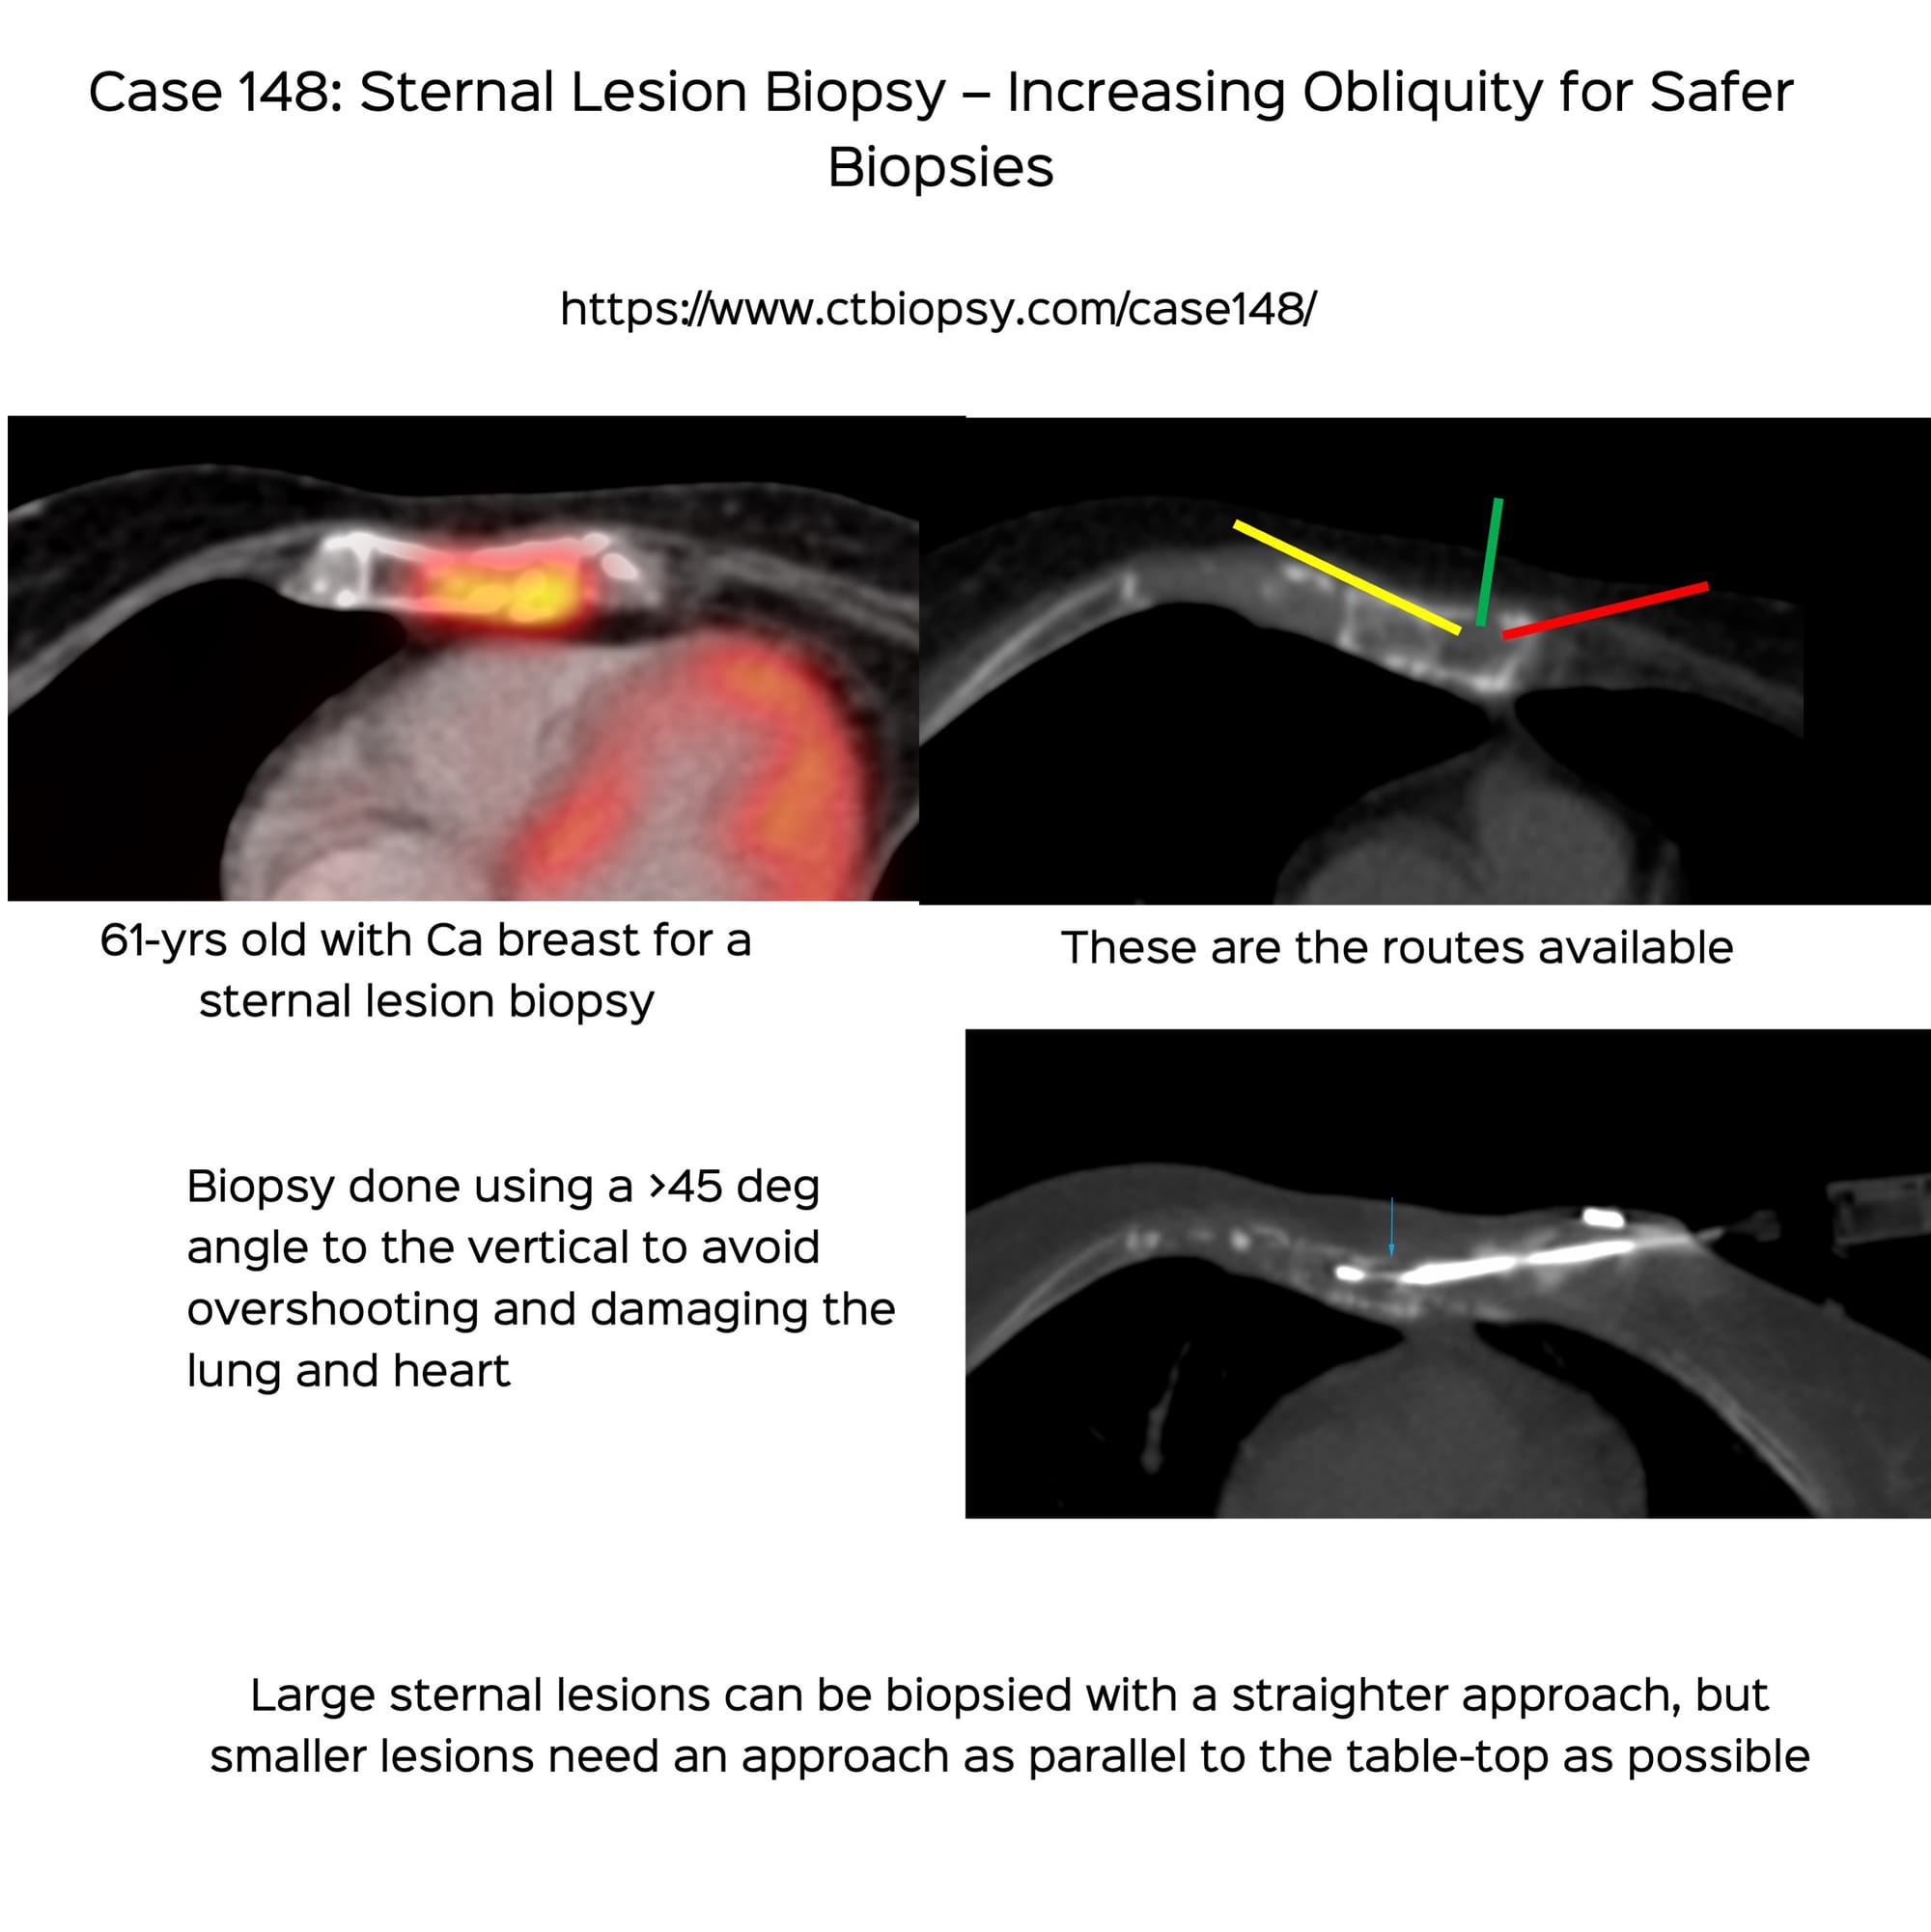 Case 148: Sternal Lesion Biopsy – Increasing Obliquity for Safer Biopsies